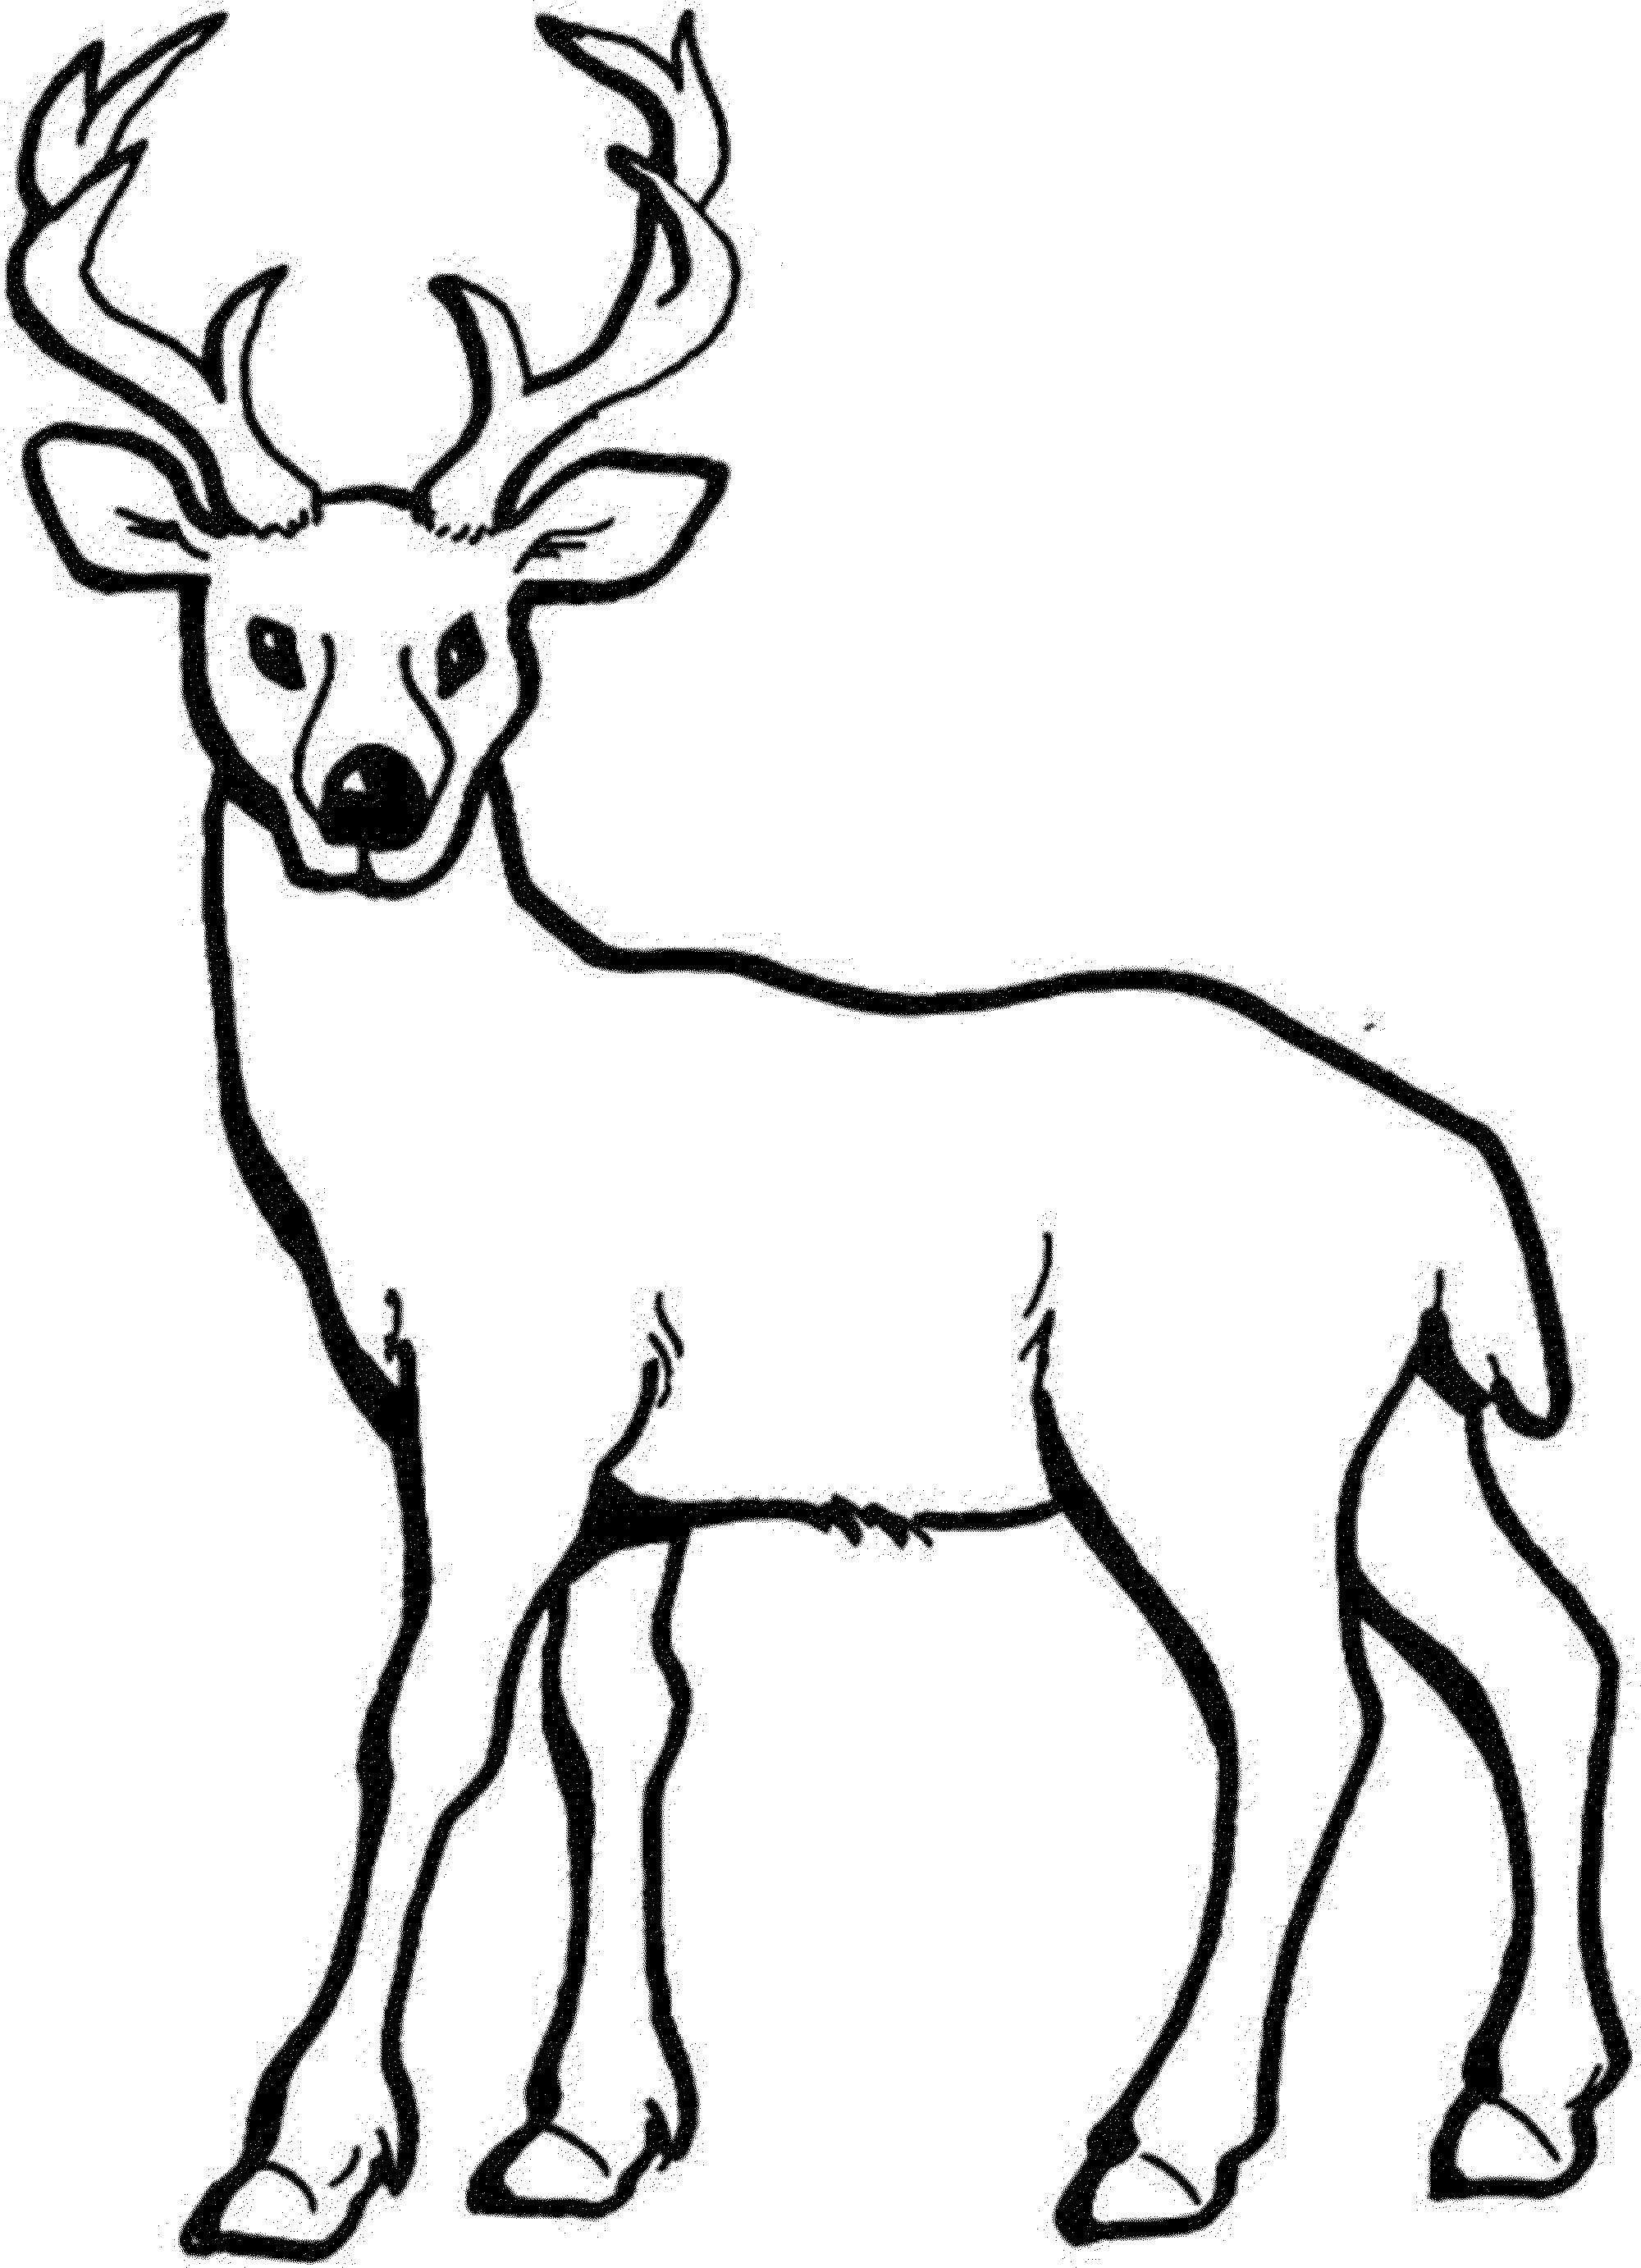 White Tailed Deer Coloring Pages To Print - Coloring Home